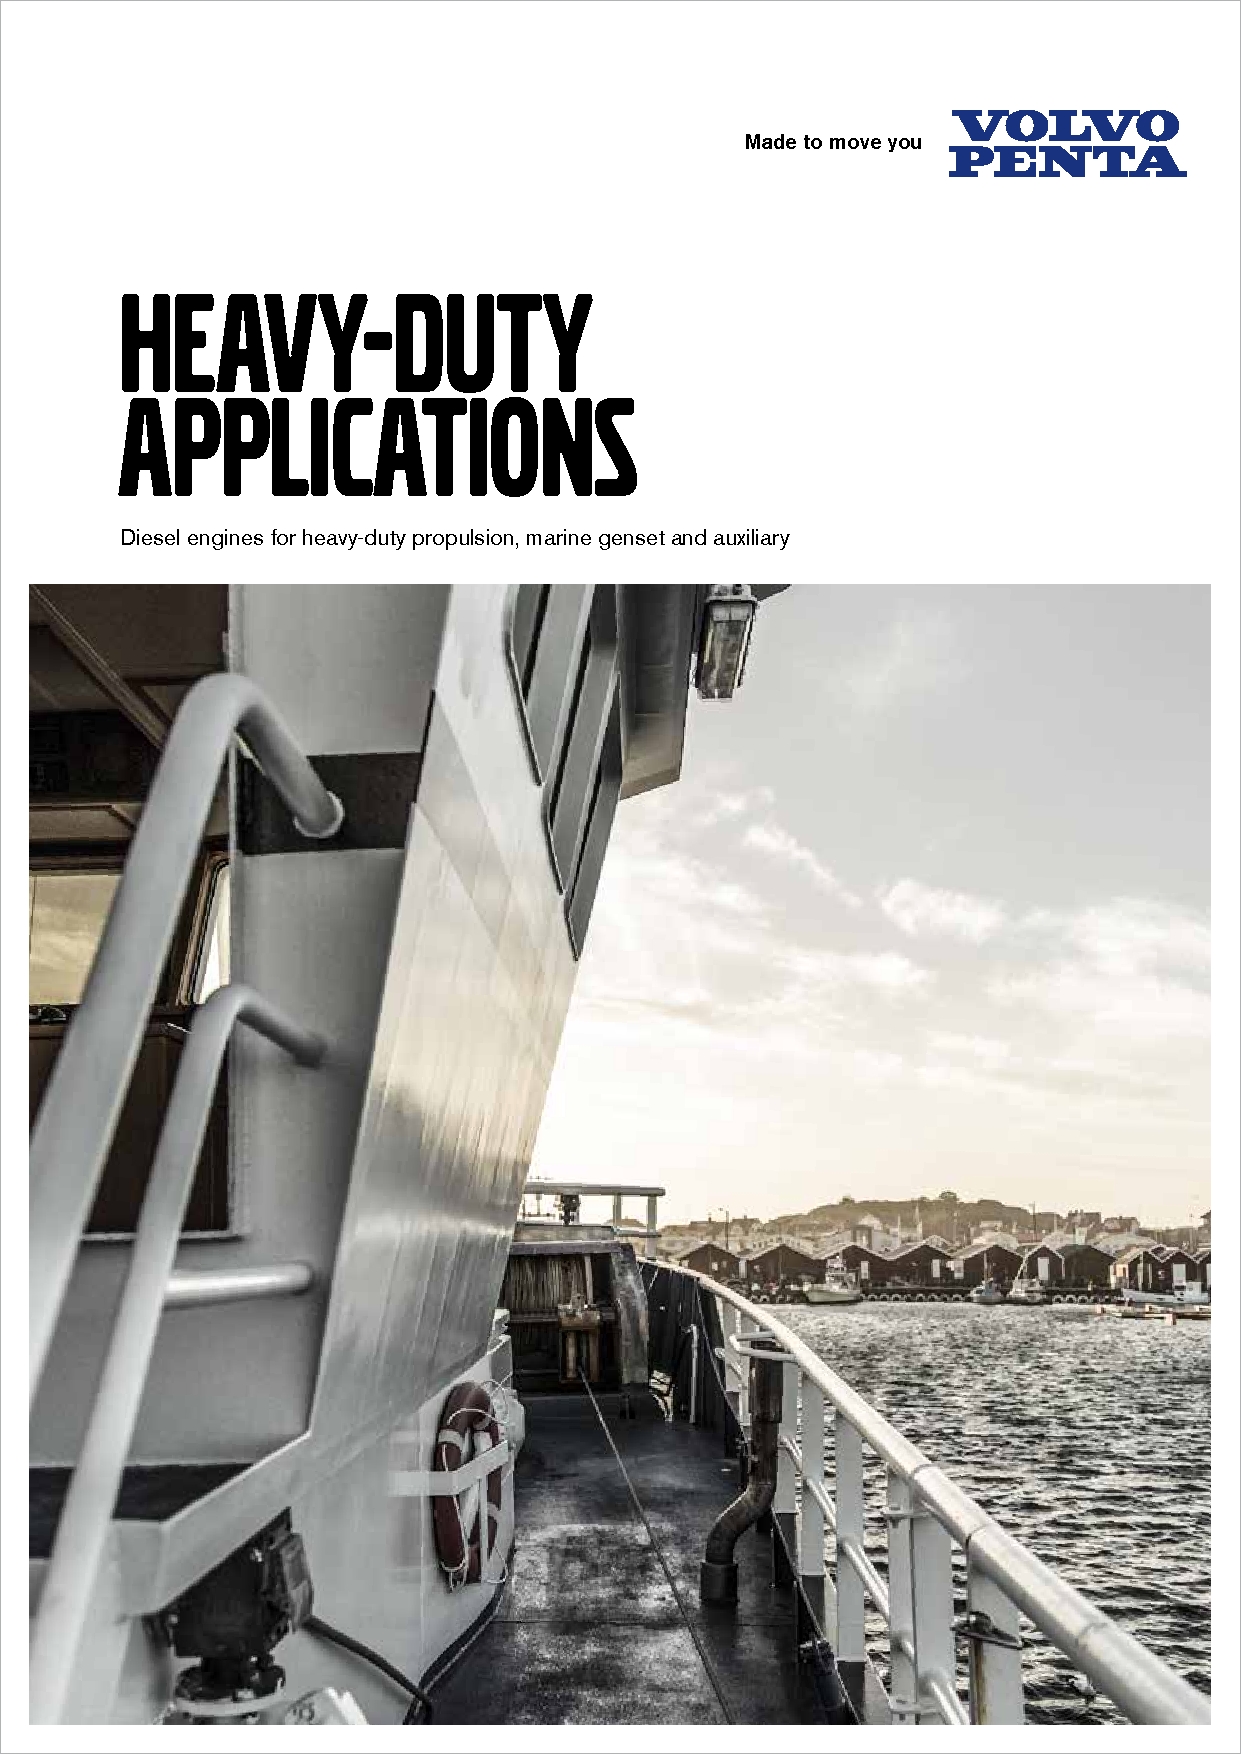 Heavy-Duty propulsion, Marine Genset and Auxiliary